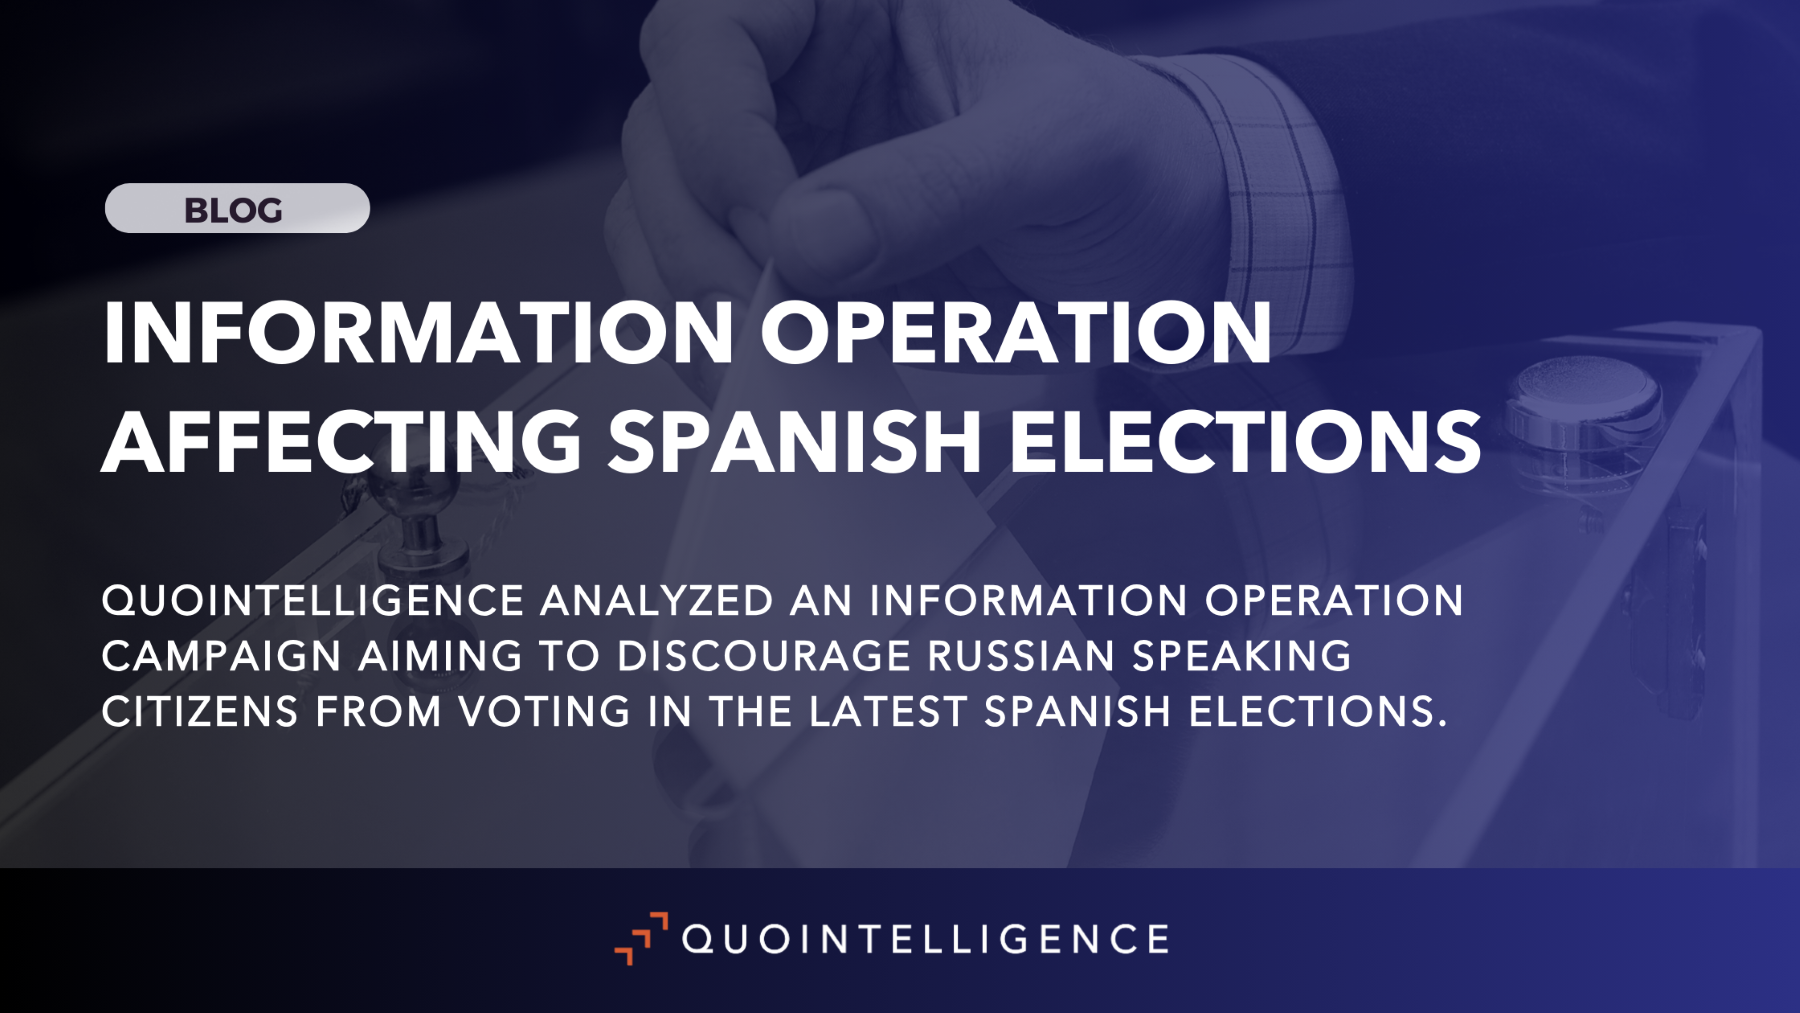 Decoding Disinformation: The Spanish Election Information Operation Targeting Russian-Speakers